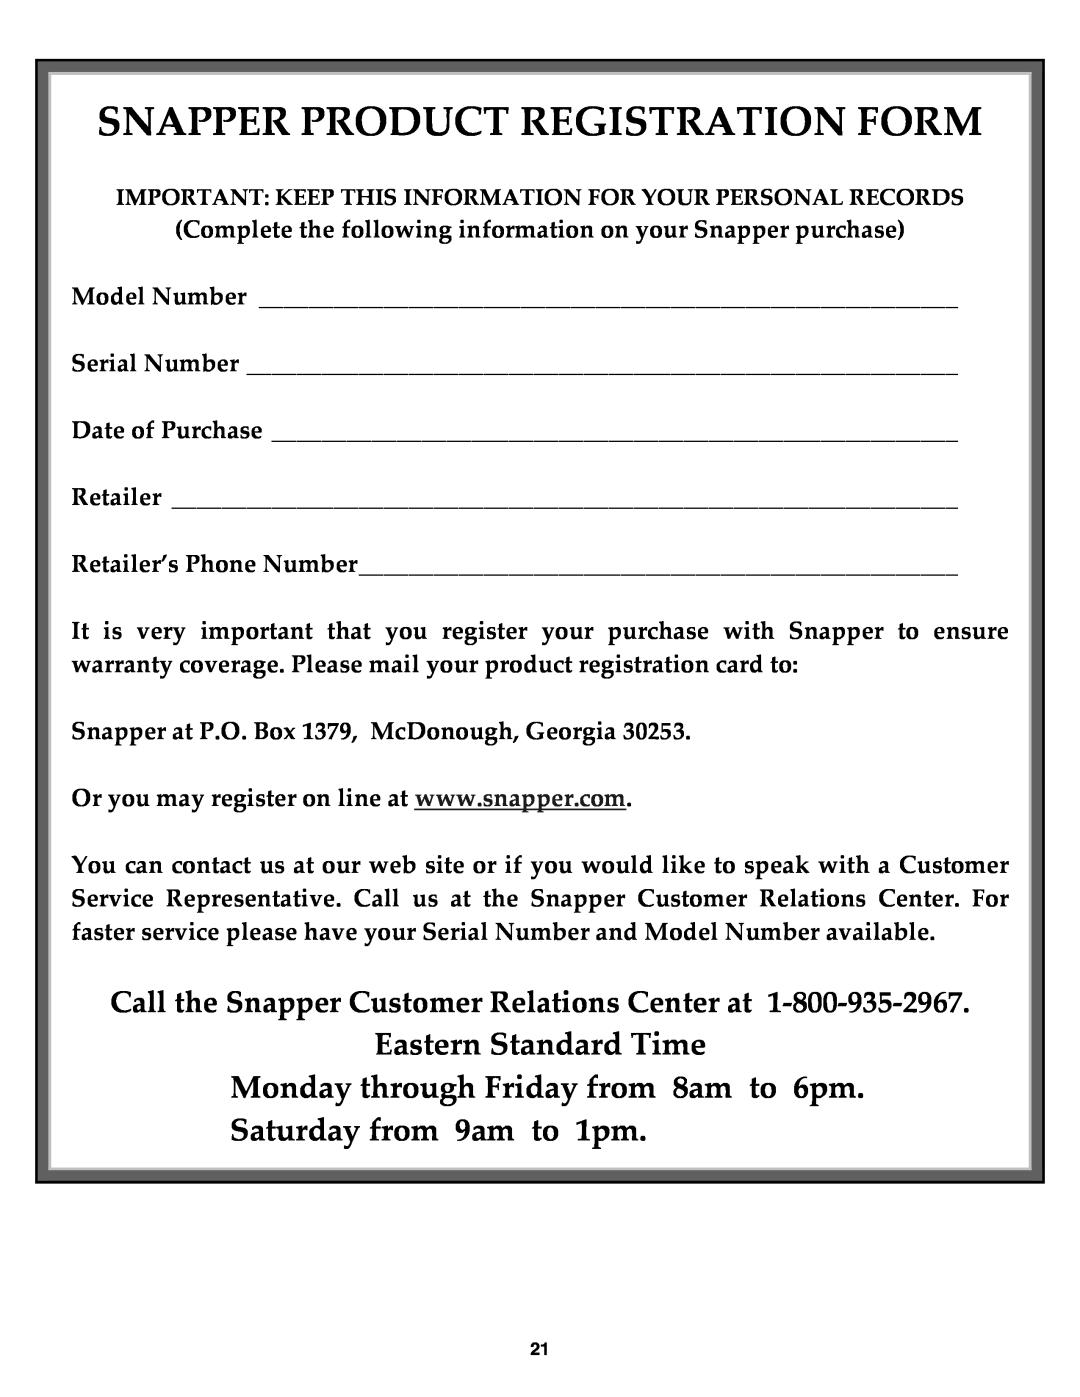 Snapper 8246, 9266, 9266E, E9266, 11306, E11306 Snapper Product Registration Form, Saturday from 9am to 1pm 